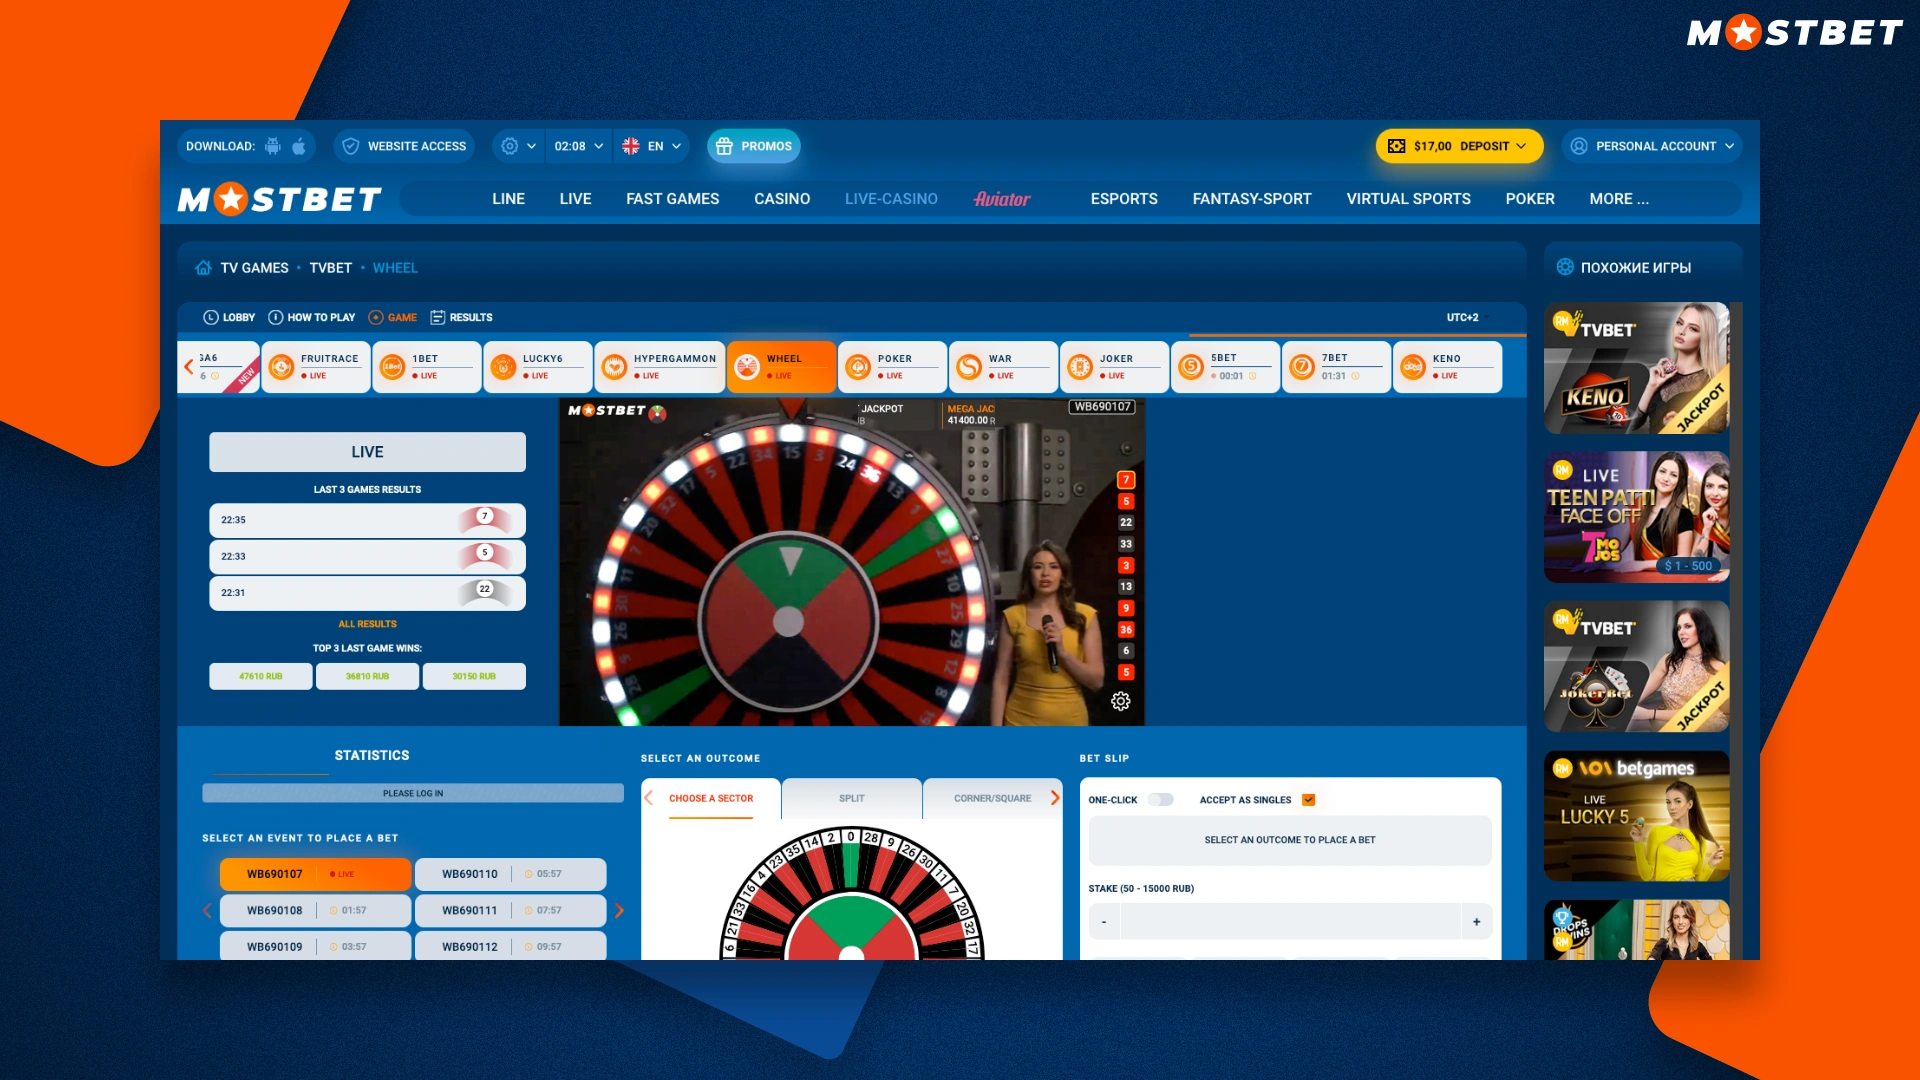 list of the main features of the online casino Mostbet